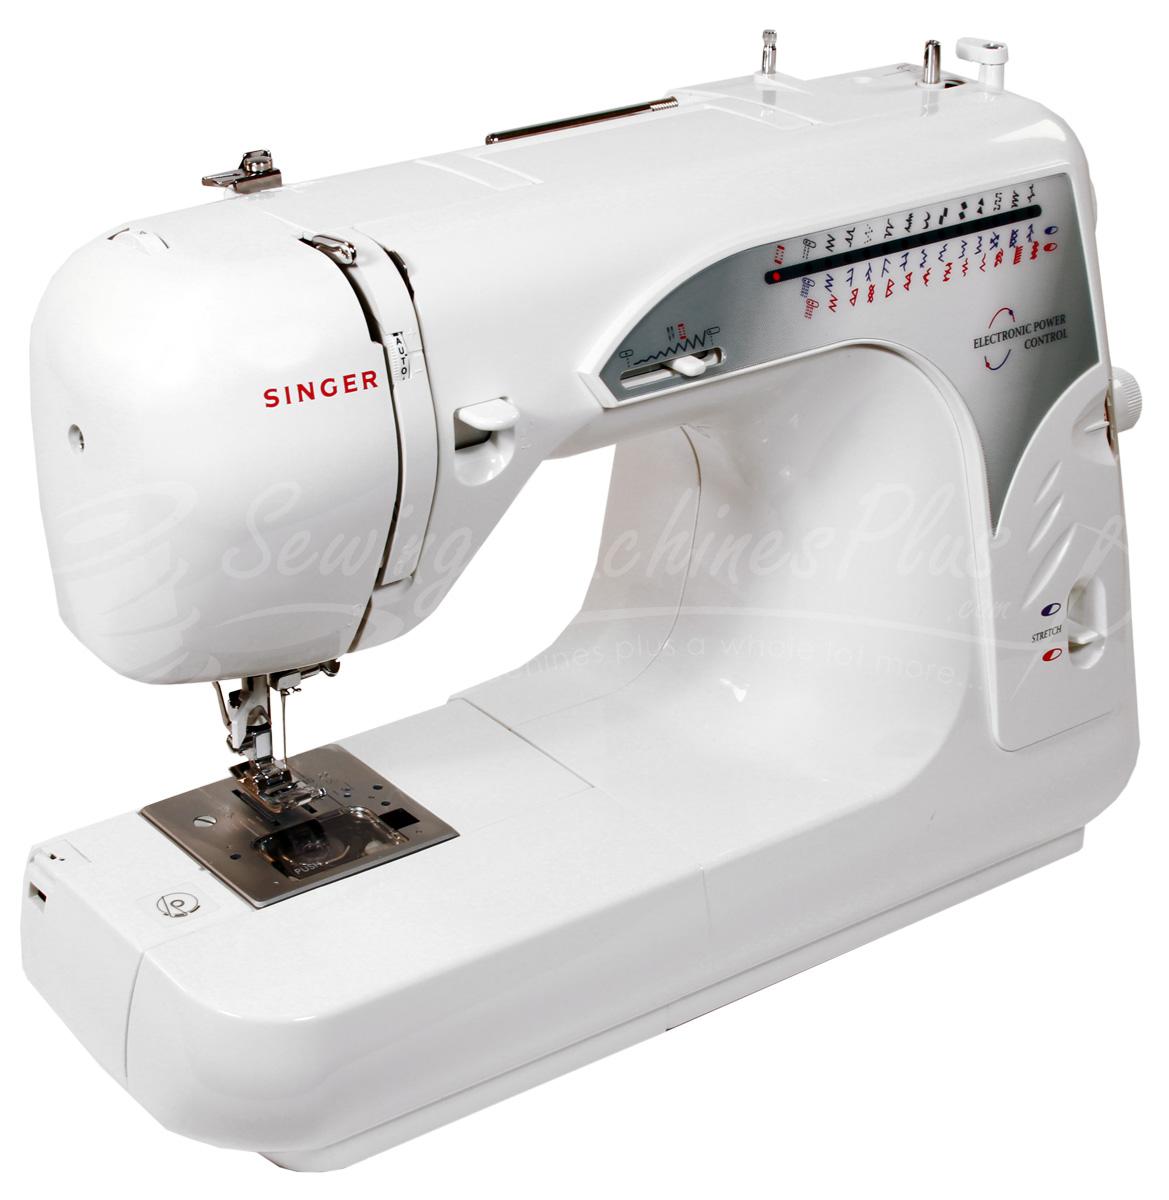 Singer One Plus Sewing Machine - A Hands-on Review